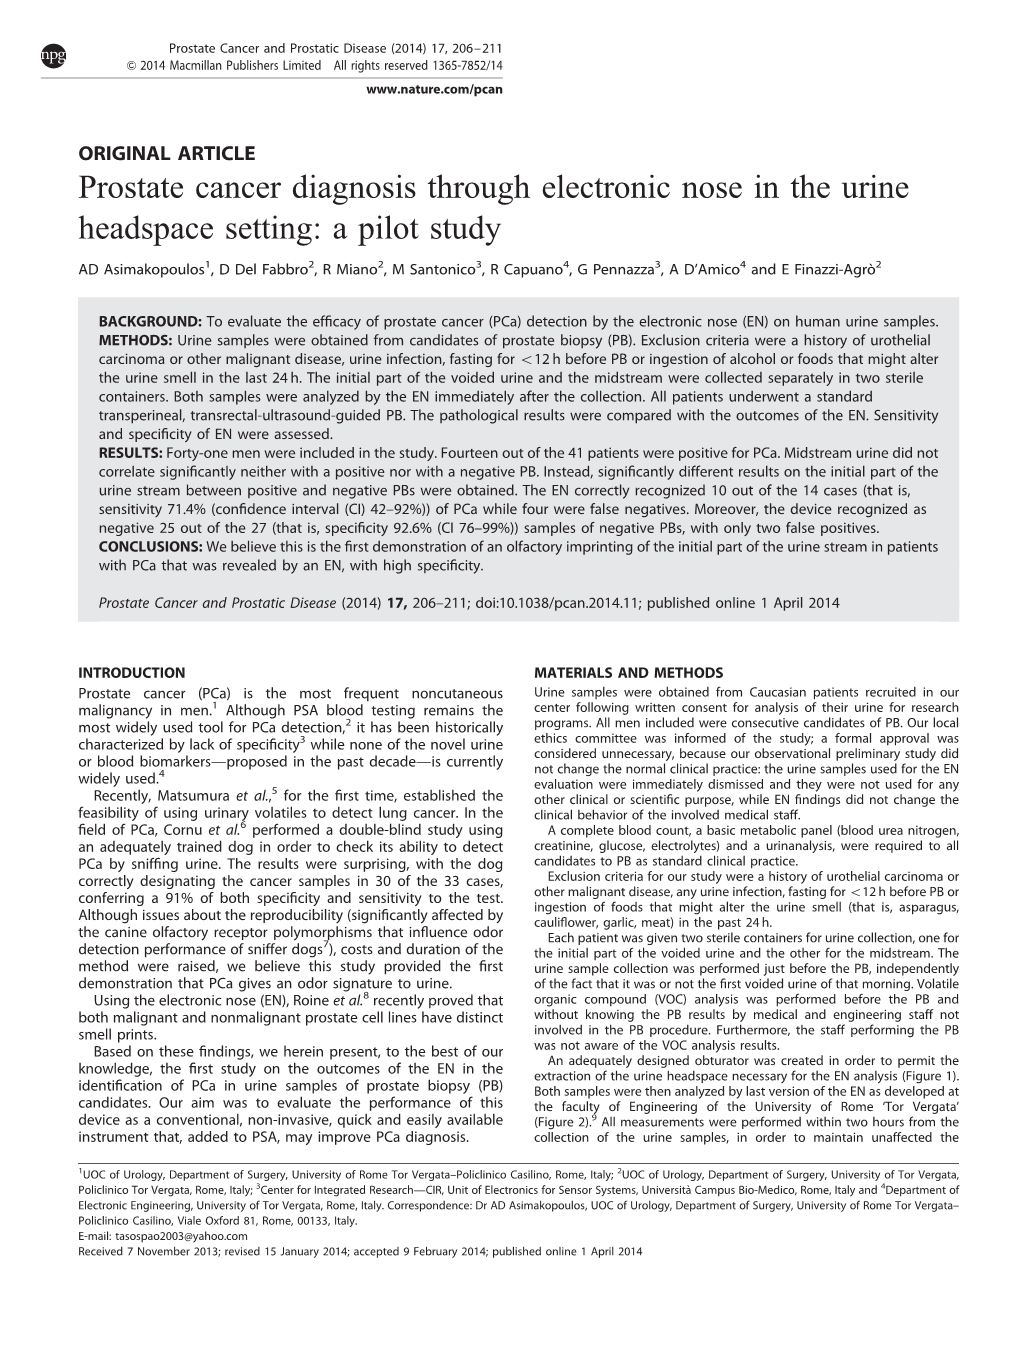 Prostate Cancer Diagnosis Through Electronic Nose in the Urine Headspace Setting: a Pilot Study